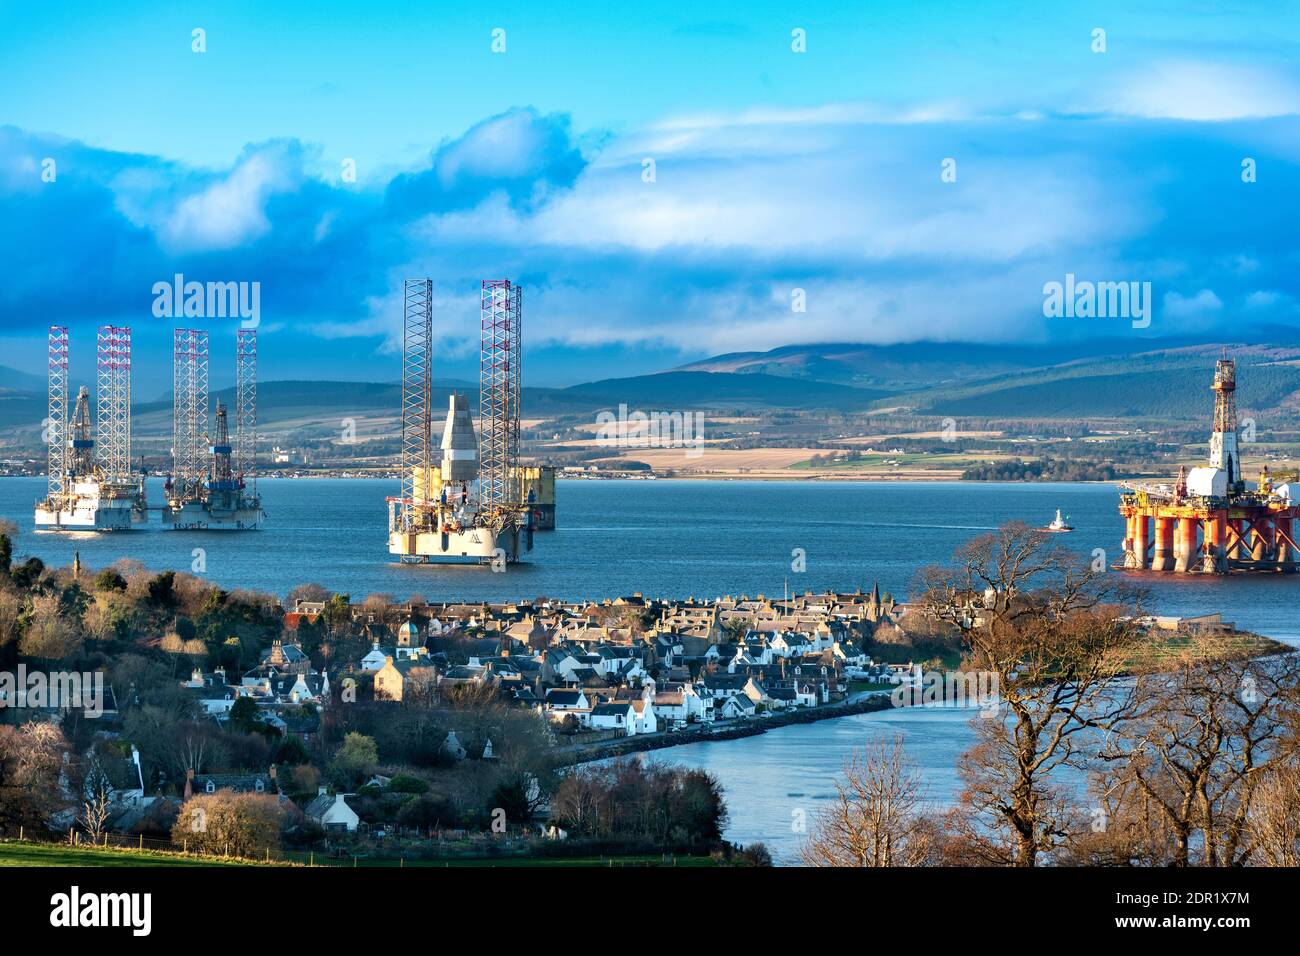 CROMARTY BLACK ISLE PENINSULAR SCOTLAND VIEW OF VILLAGE HOUSES AND OIL RIGS OR PLATFORMS IN THE CROMARTY FIRTH Stock Photo